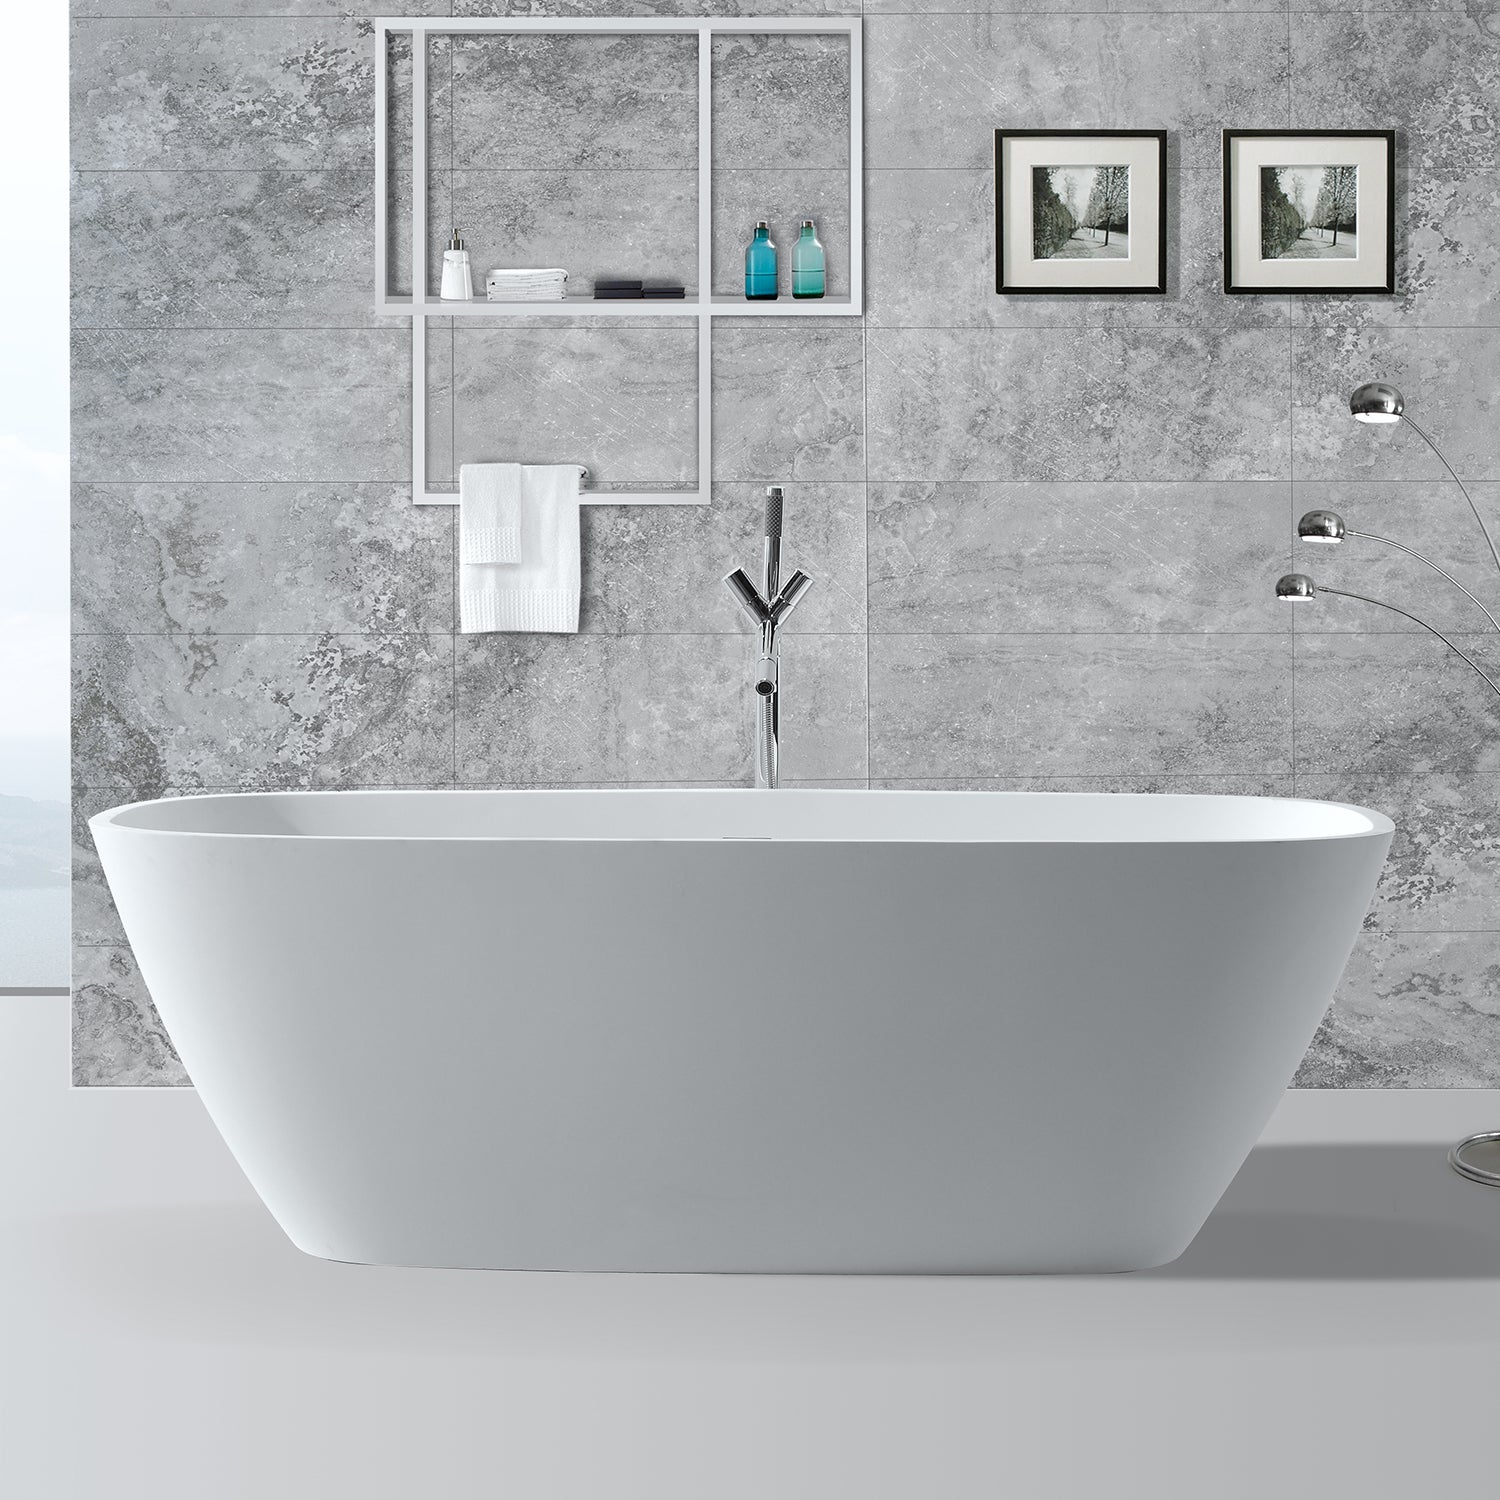 DAX Oval Freestanding Matte Solid Surface Bathtub with Central Drain and Overflow, Fiberglass Reinforcement, Full Immersion, Stainless Steel Frame, 67-3/4 x 21-5/8 x 28-3/4 Inches (BT-AB-B037)